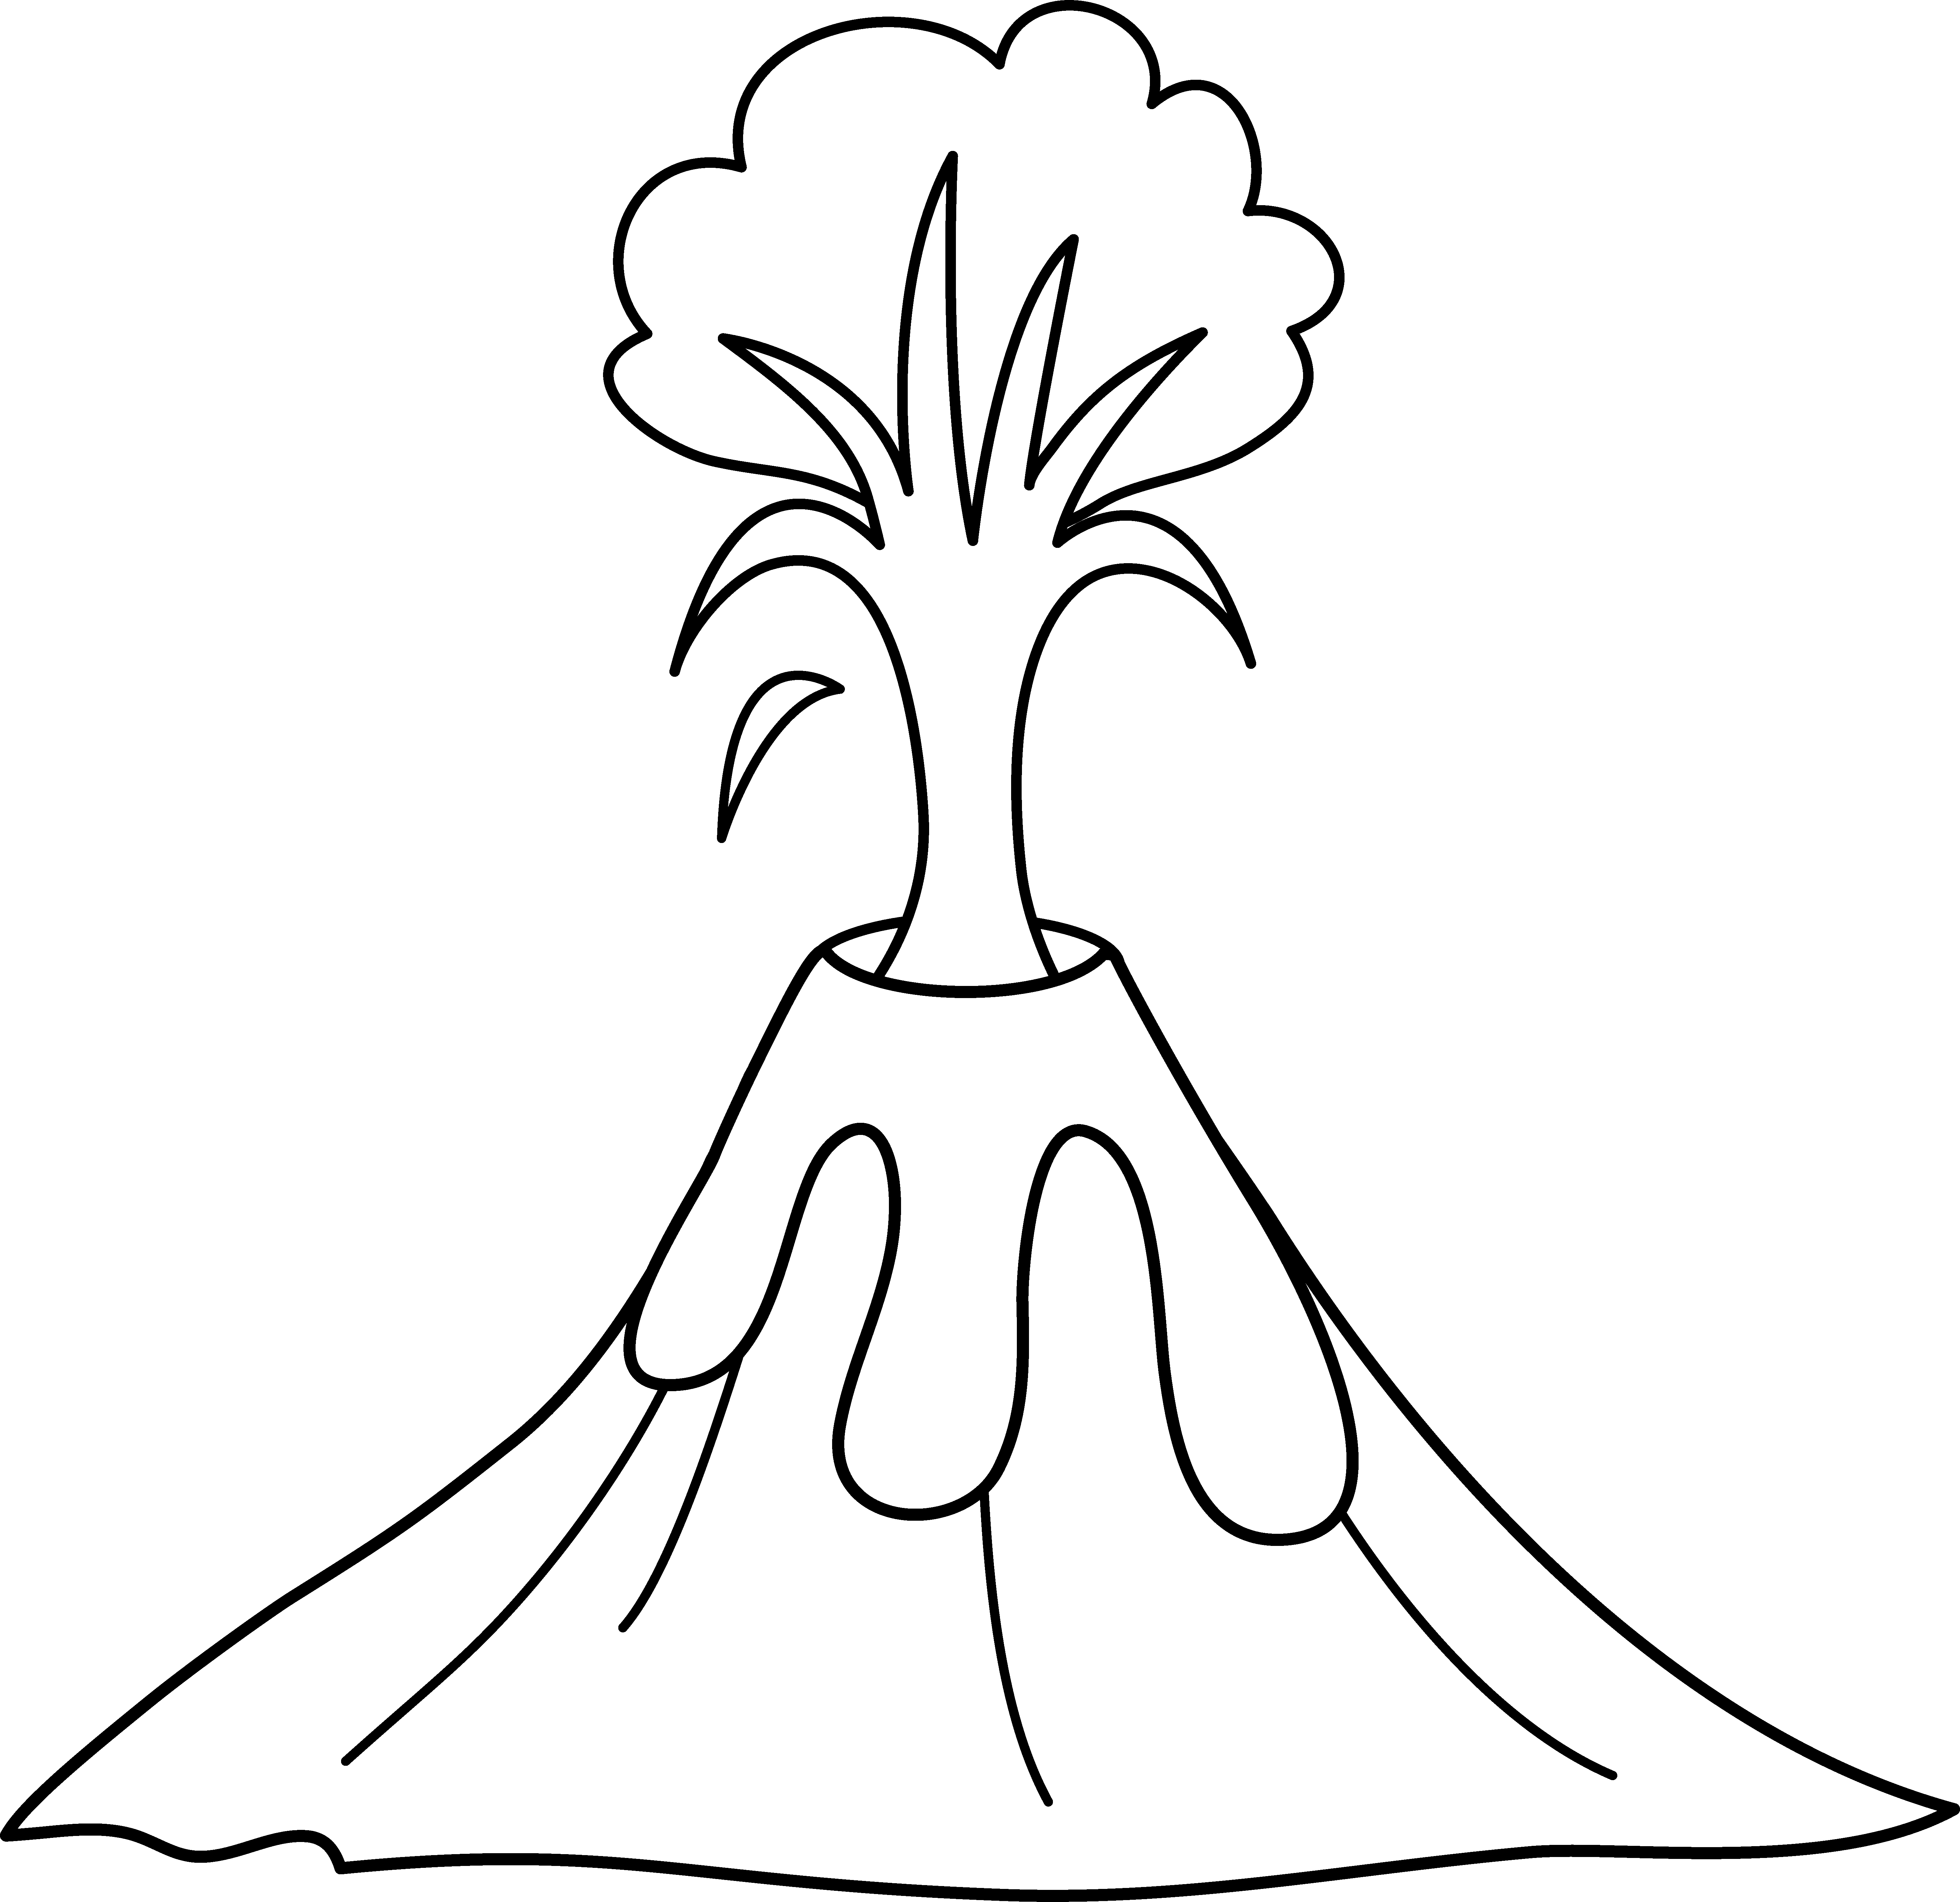 unbelievable volcano clip art black and white with volcano coloring.